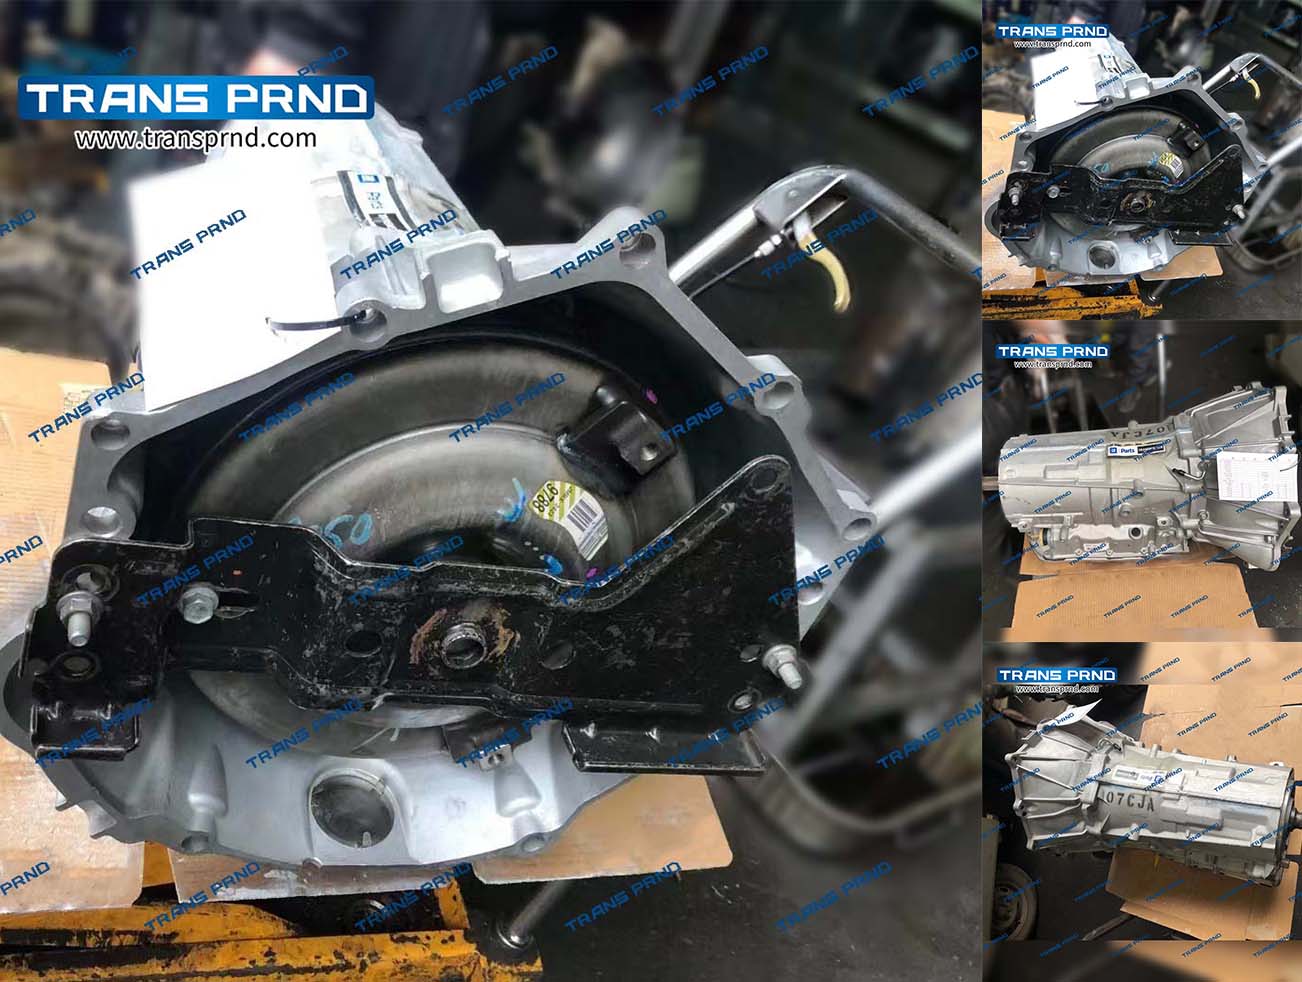 6L80E Escalade gearbox assembly 凯雷德变速箱总成